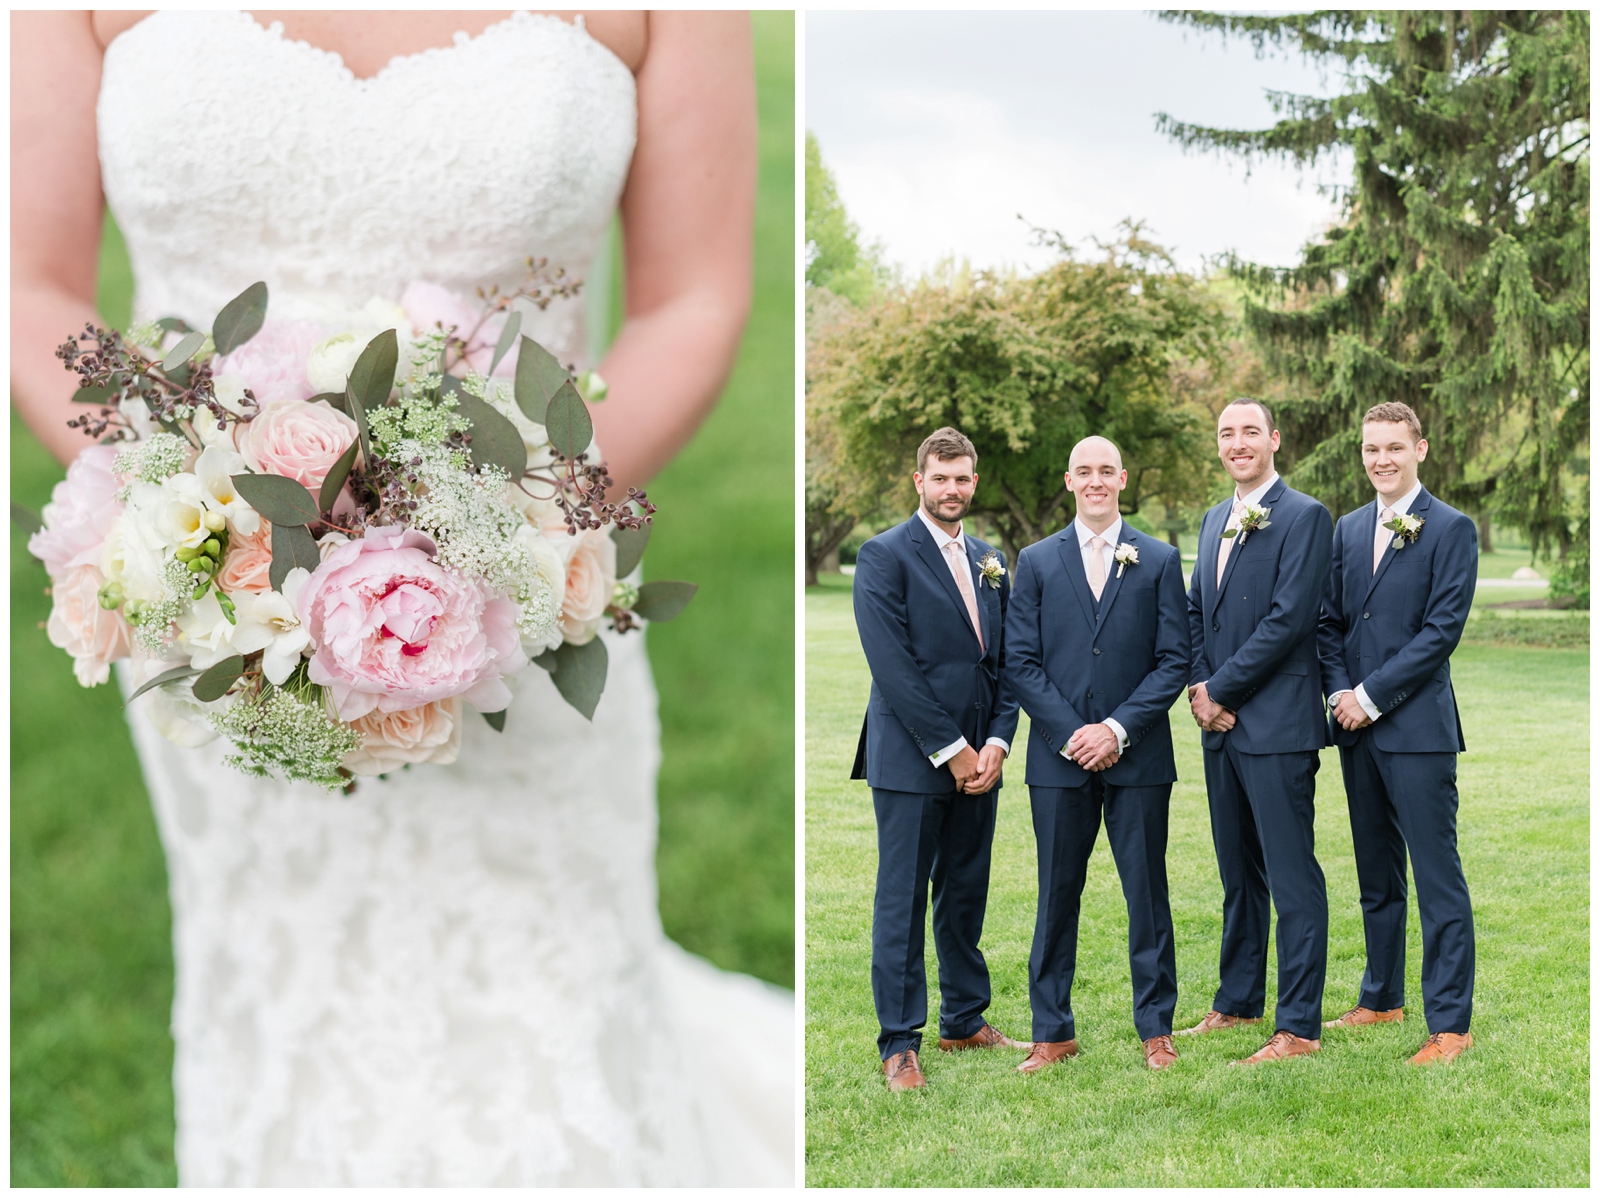 close up of bride's bouquet with pink peonies and baby's breath and portrait of groomsmen in navy suits and brown shoes